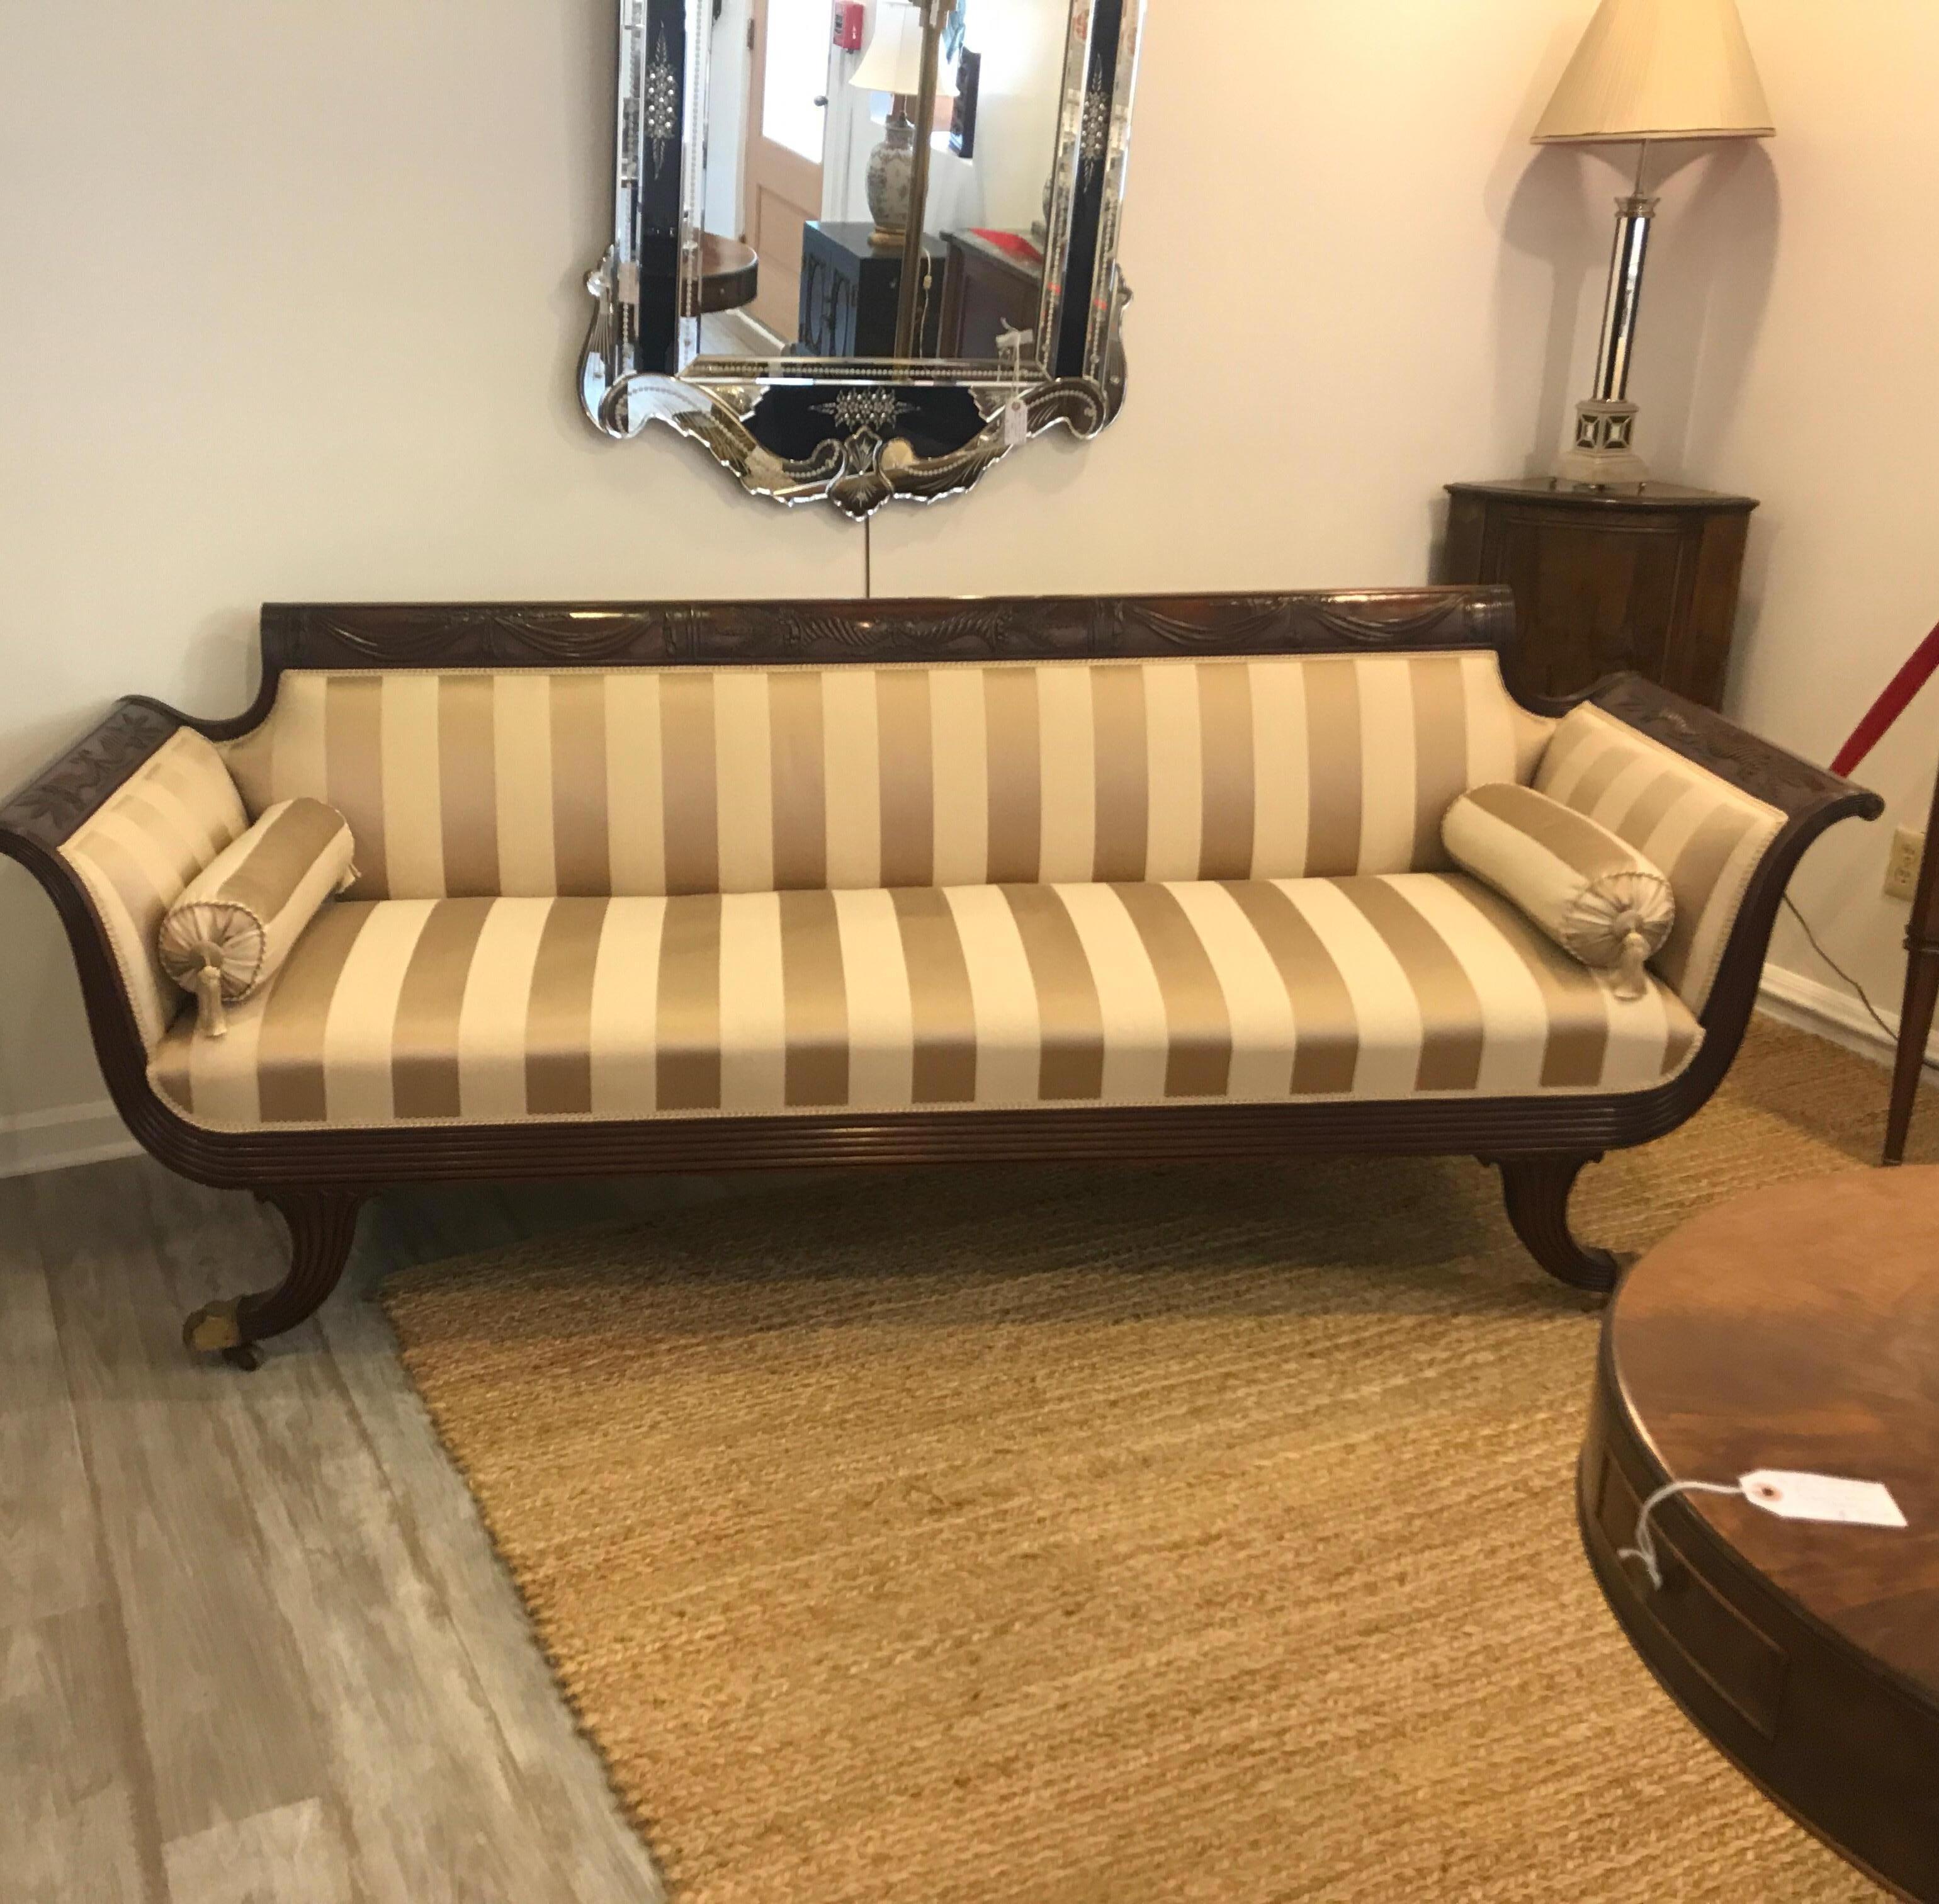 Elegant hand carved mahogany Duncan Phyfe style sofa with damask stripe upholstery. The attached back and seat, with nicely finished back with two tasselled round bolster accent pillows. Has the original brass capped feet and castors.